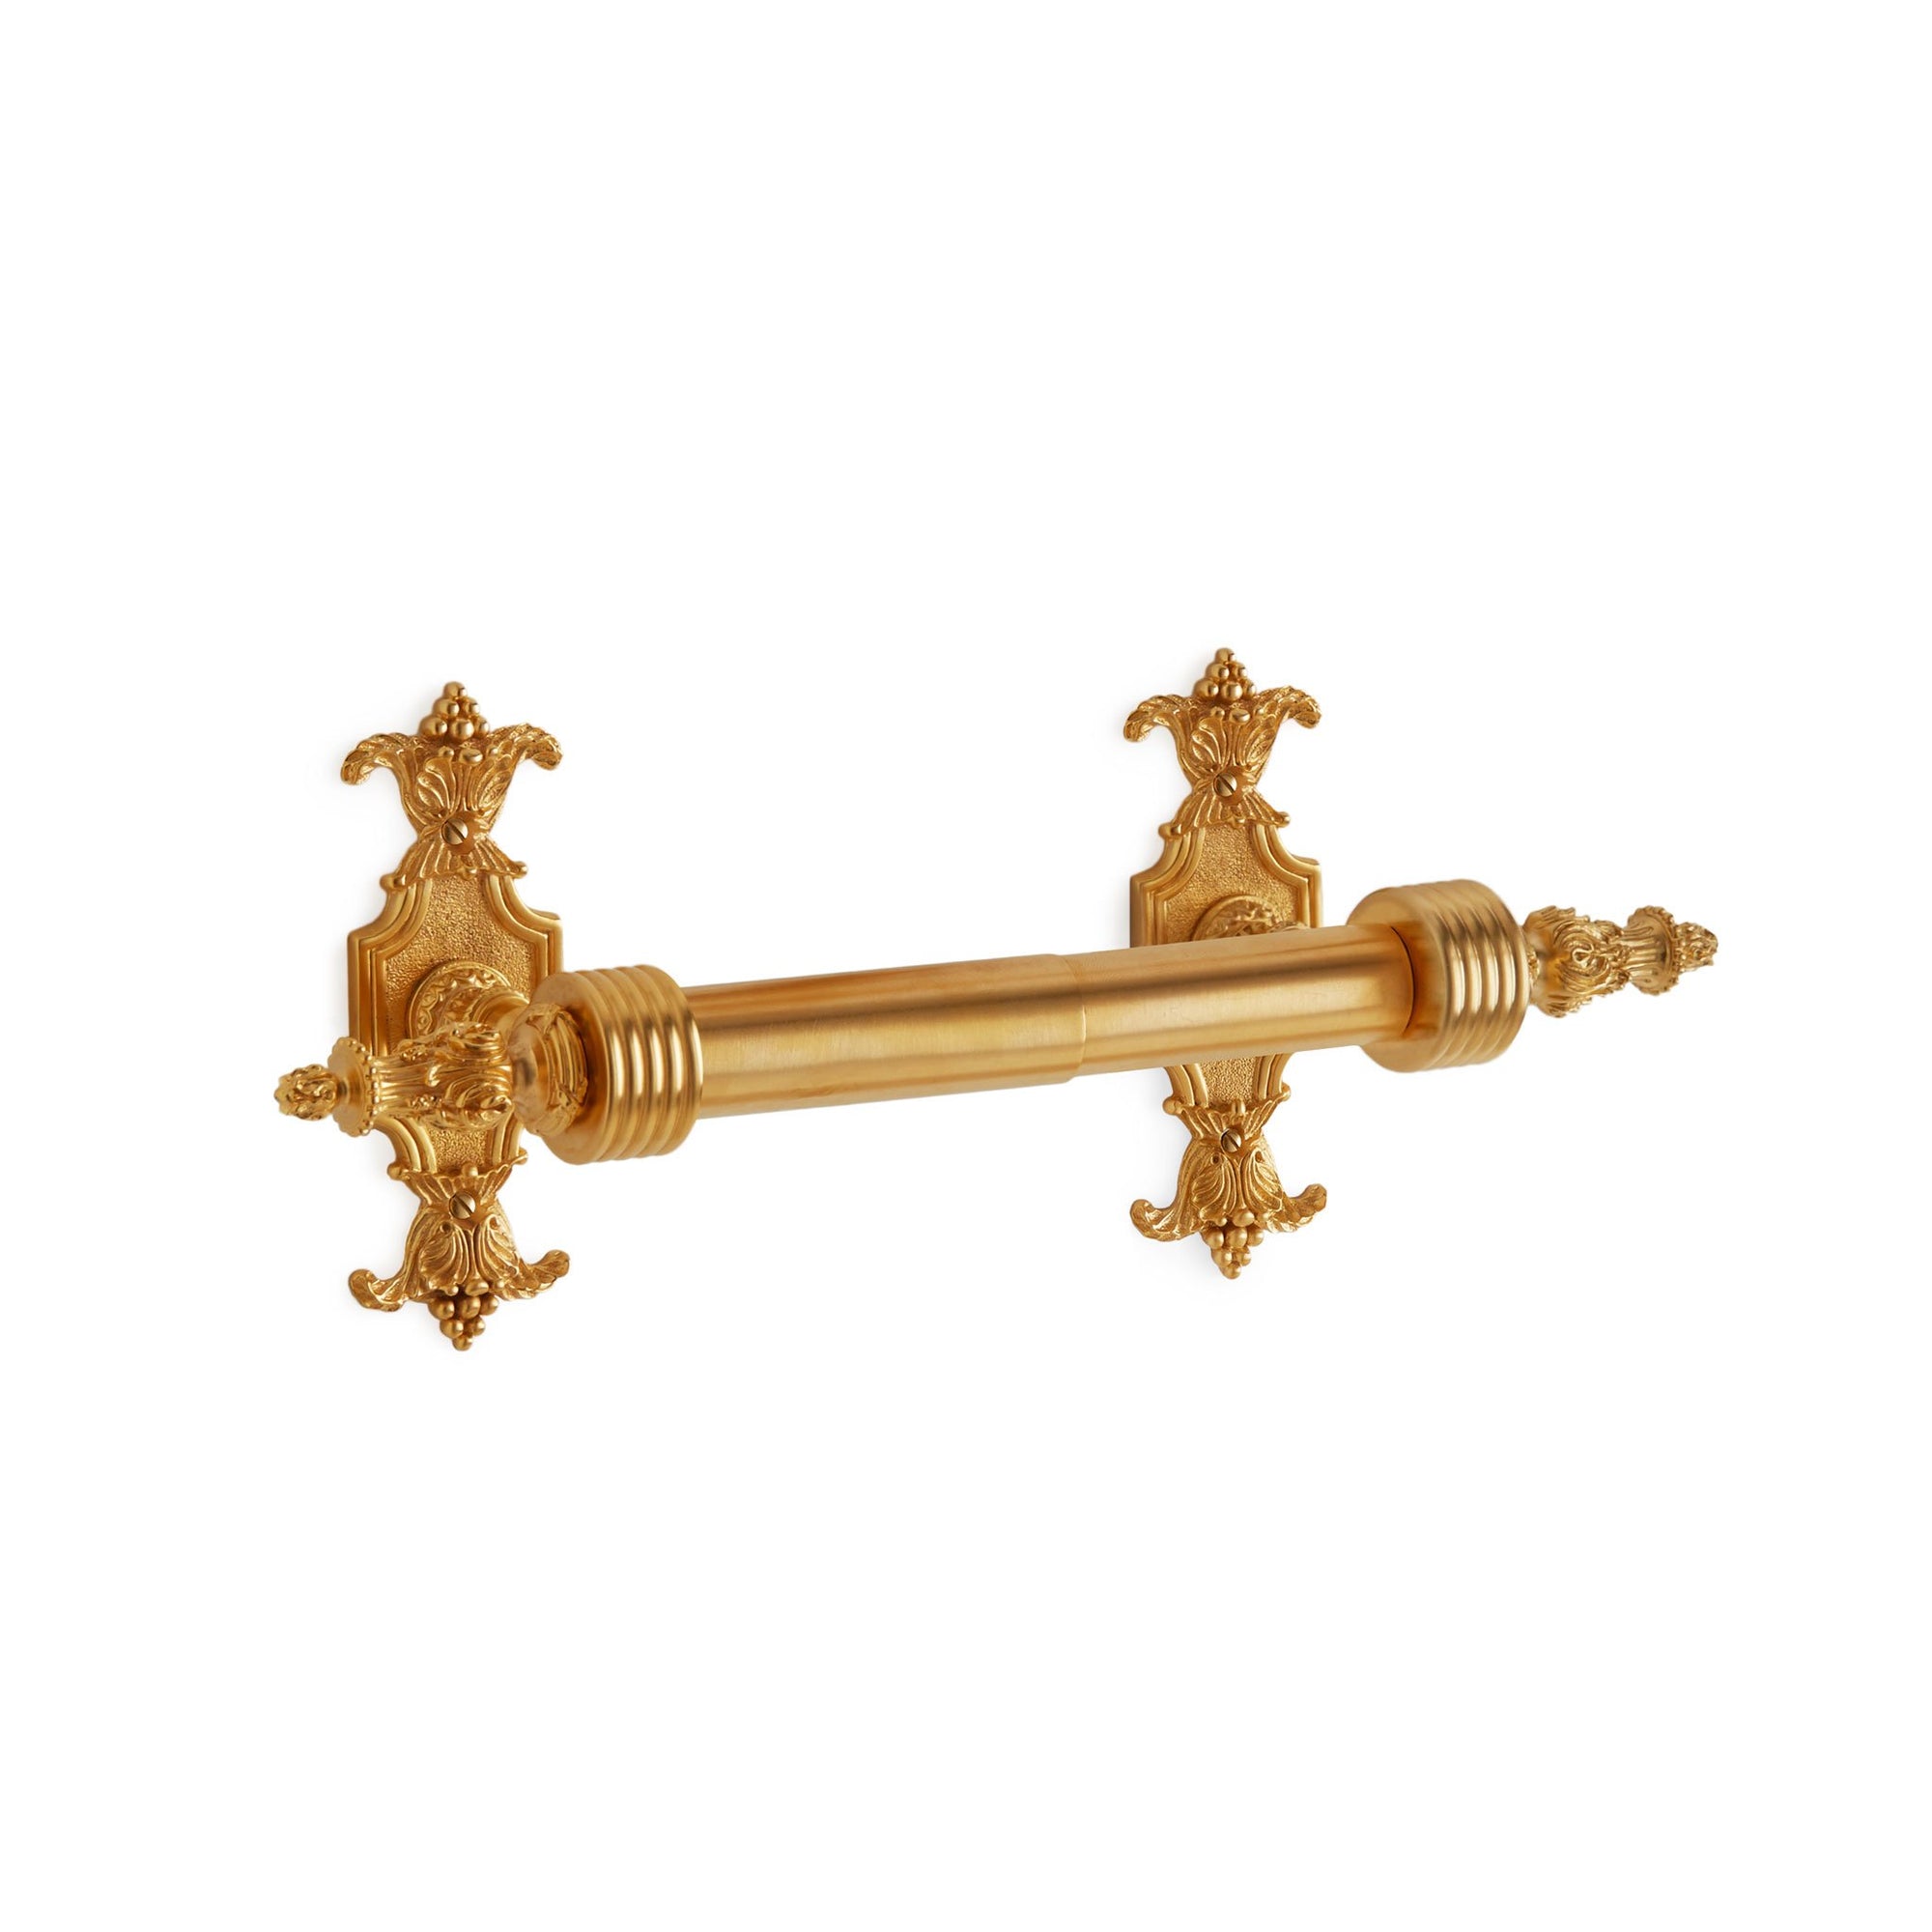 3533-DP-GP Sherle Wagner International Louis XVI Double Post Paper Holder in Gold Plate metal finish